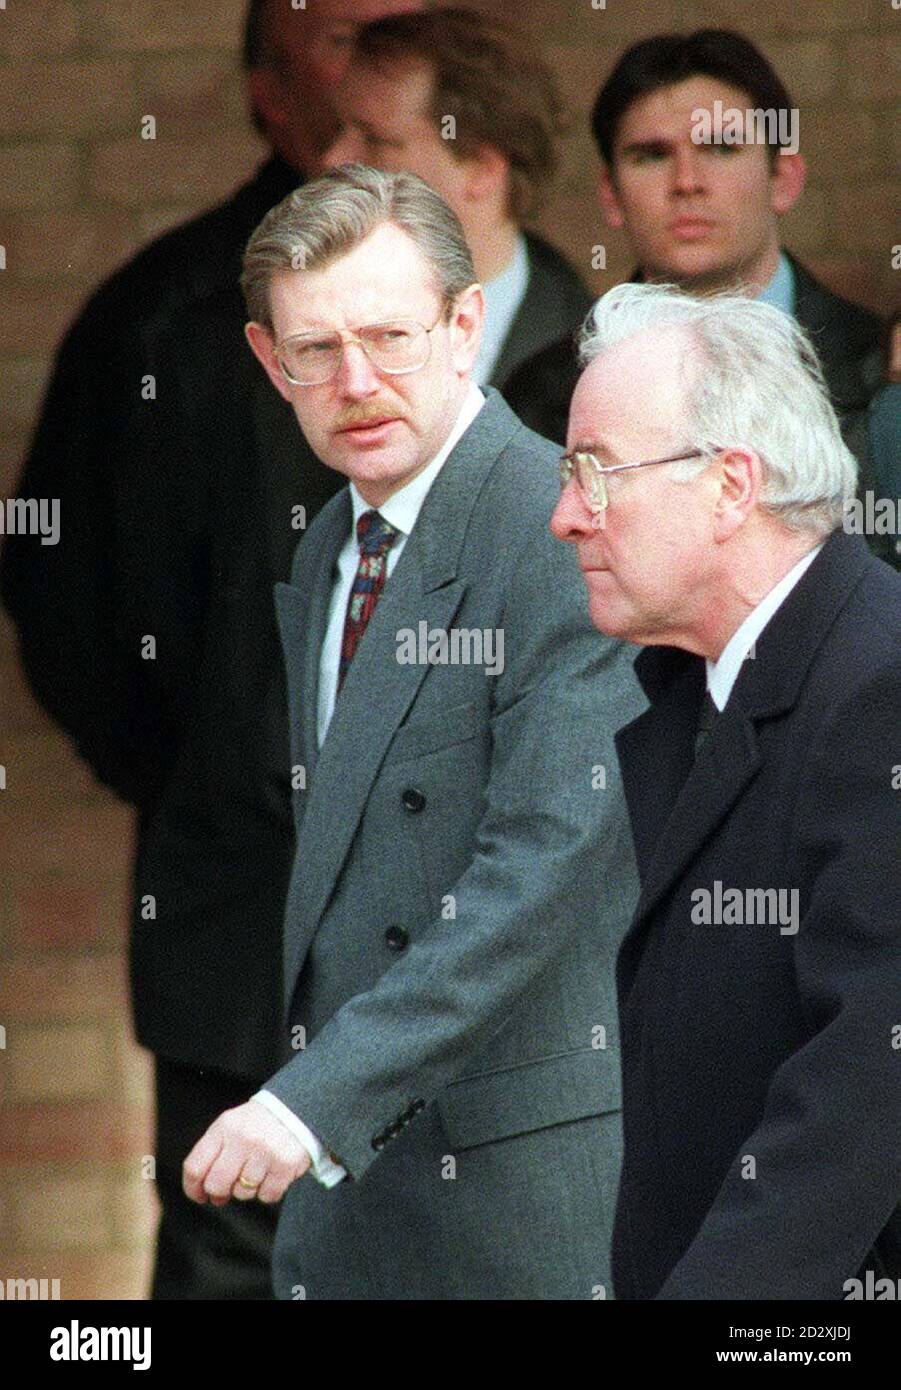 Irish Ambassador Edward Barrington (light suit) arriving at Peterborough Crematorium today (Monday) for the funeral of Lance Bombadier Stephen Restorick, the 23-year-old who was shot dead at a vehicle checkpoint just outside of the village of Bessbrook, Ulster, on February 12. Picture by DAVID JONES/PA Stock Photo